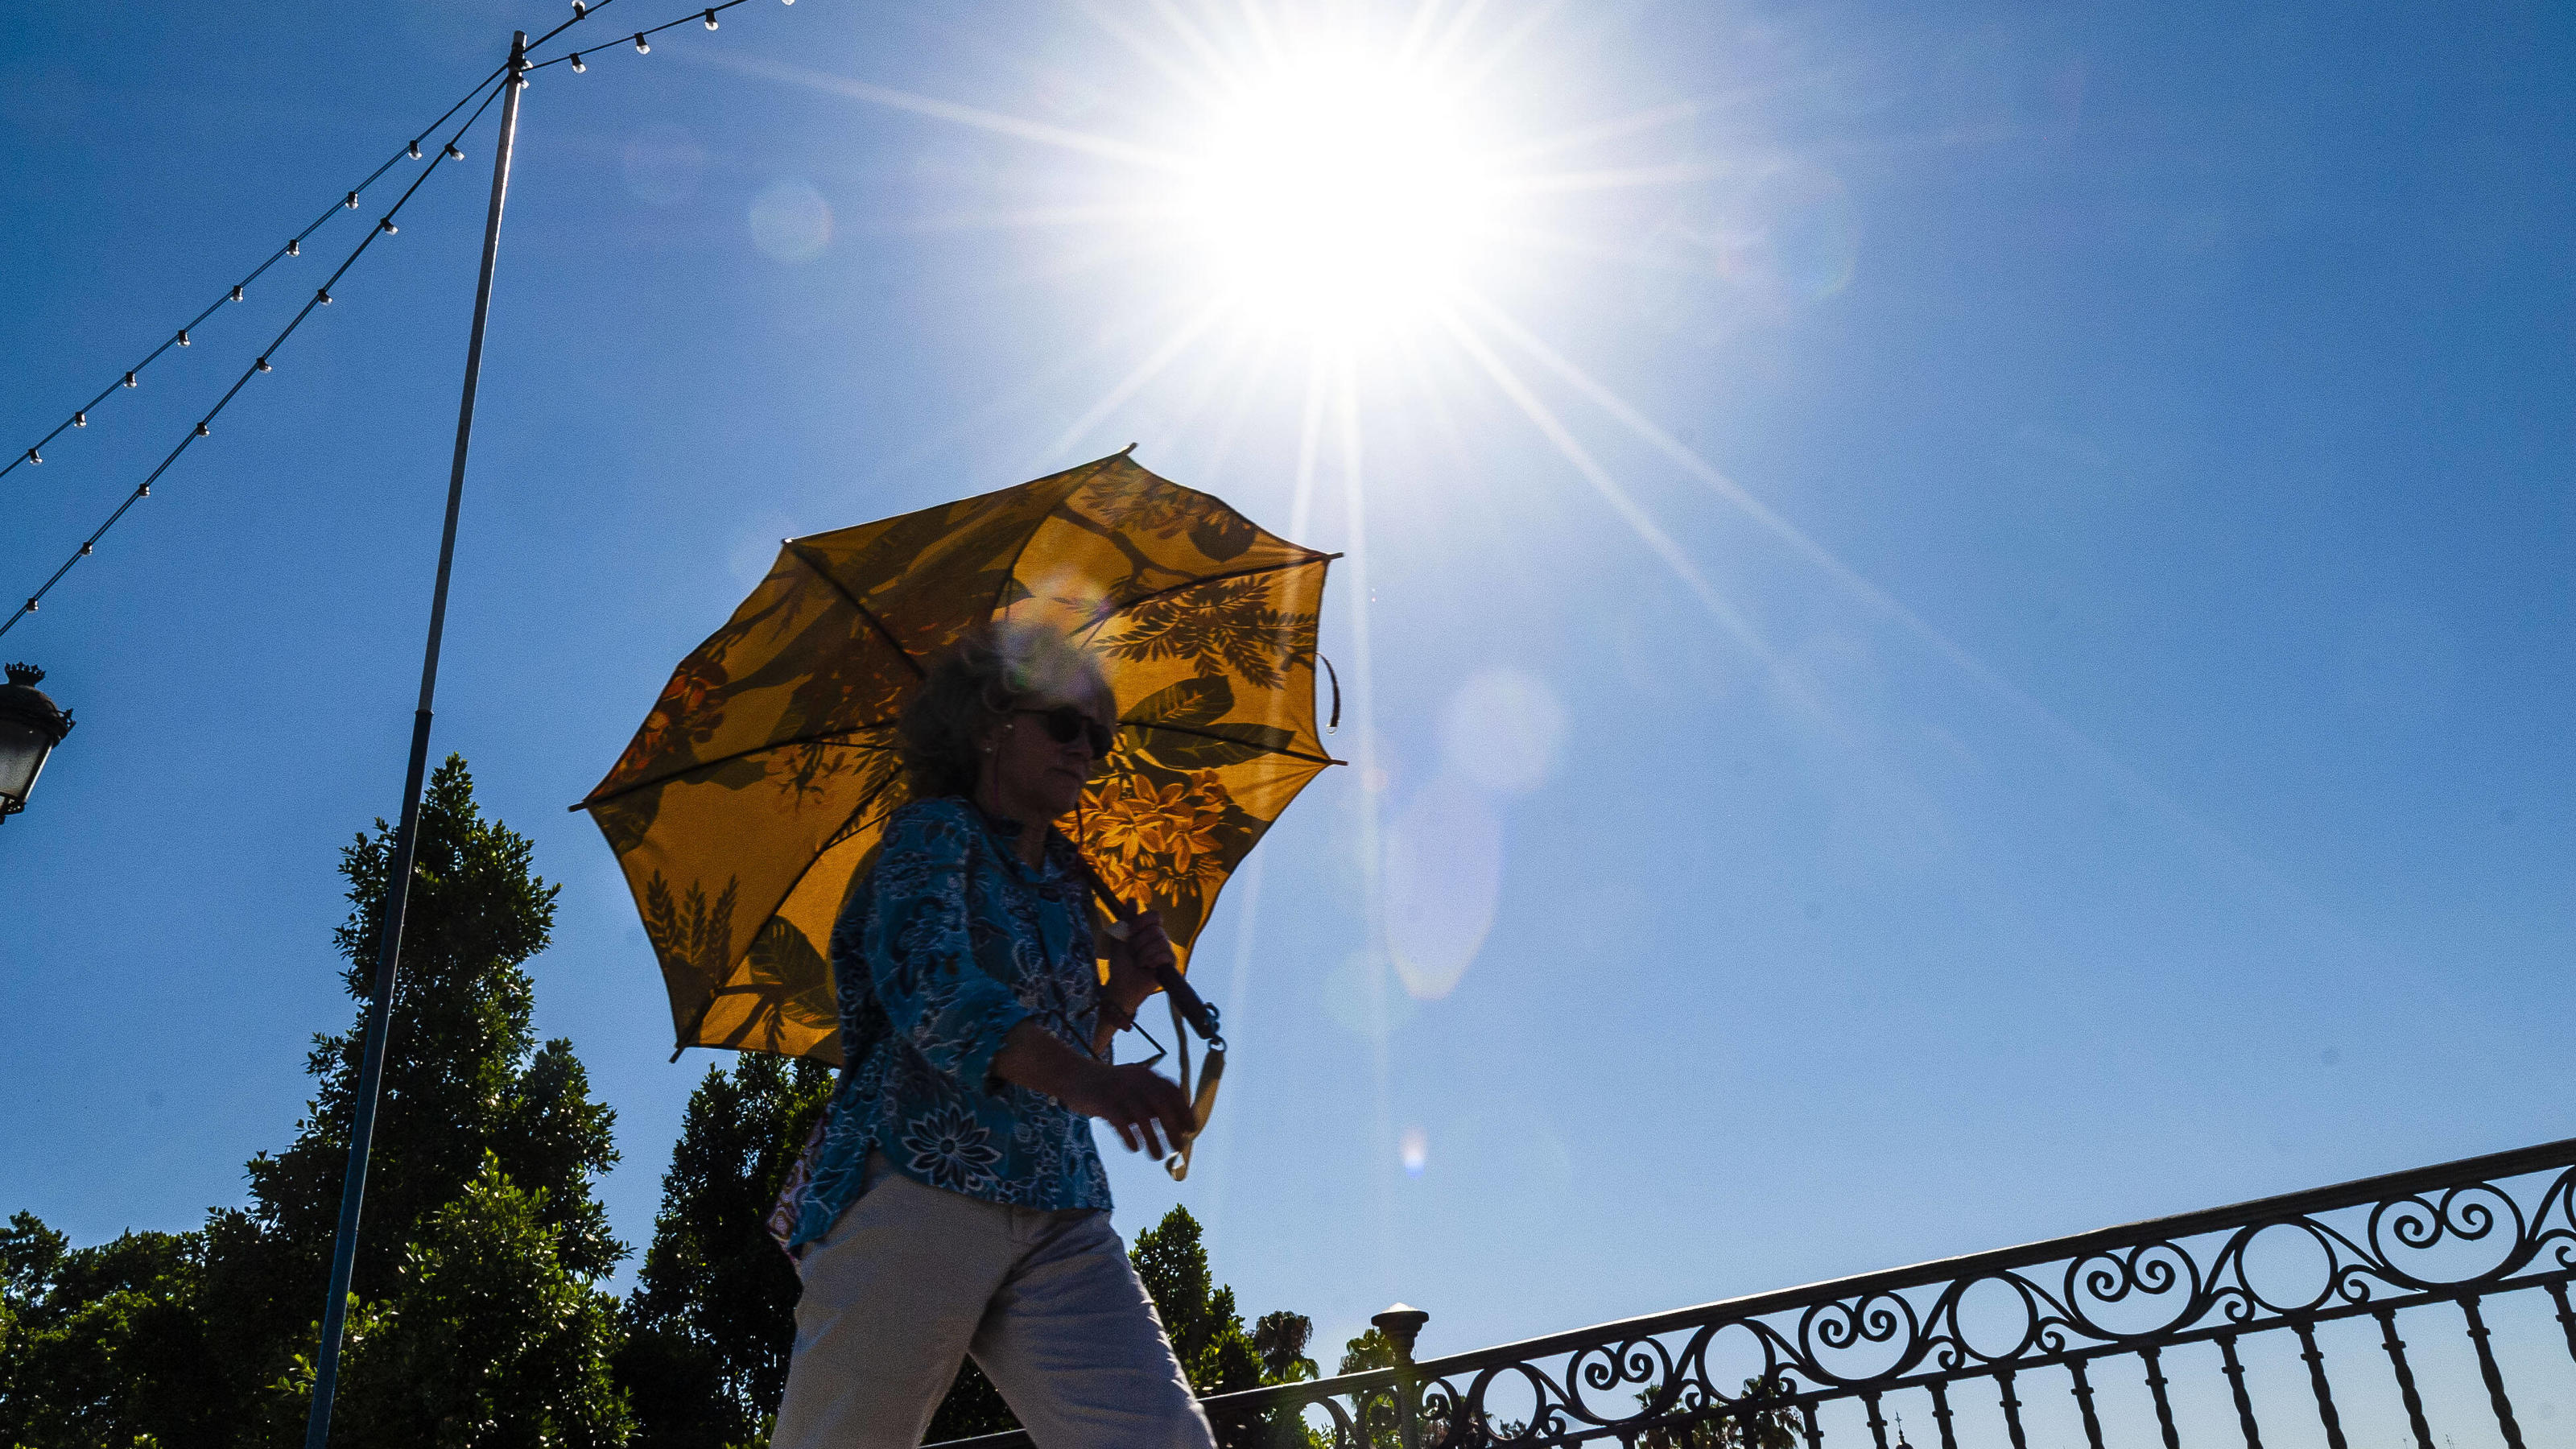 News Bilder des Tages July 20, 2022, Seville, Andalusia, Spain: The heat wave which has affected Spain since last week has ended, at least in theory, according to the Spanish metereological agency, AEMET. The extreme heat episode officially ended thi